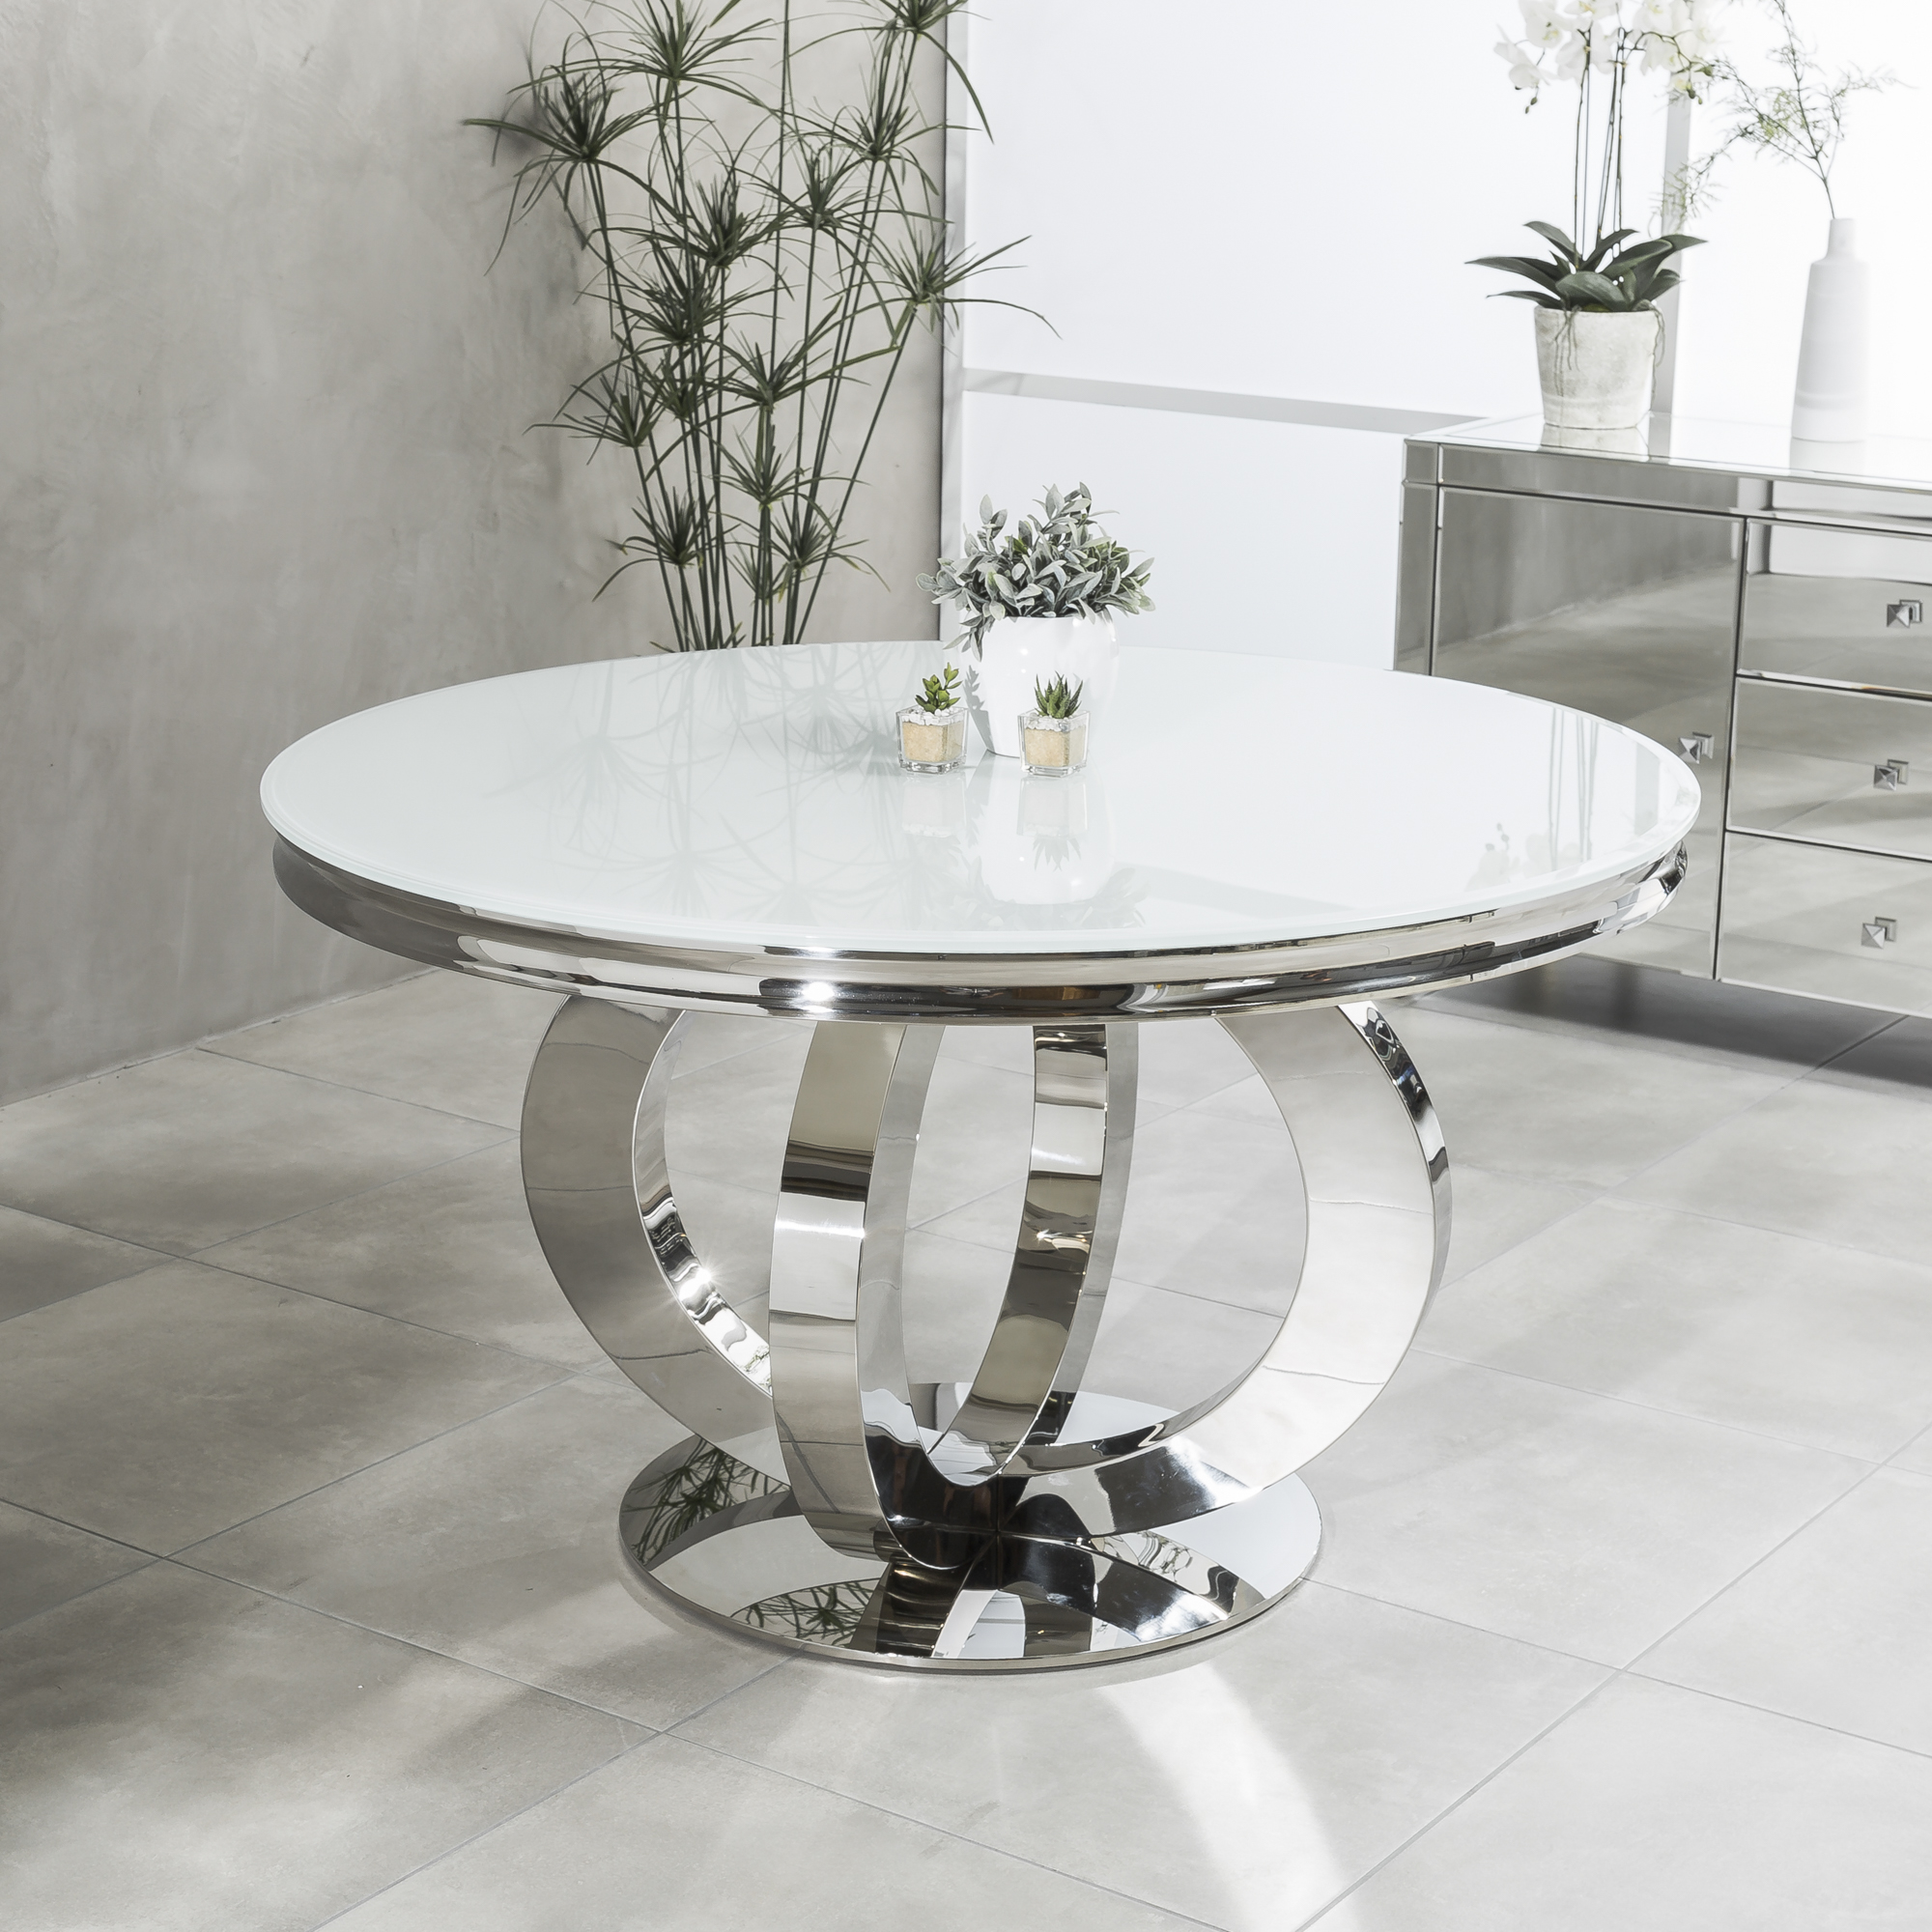 1.3m Round Glass Dining Table in White With Polished Steel Base